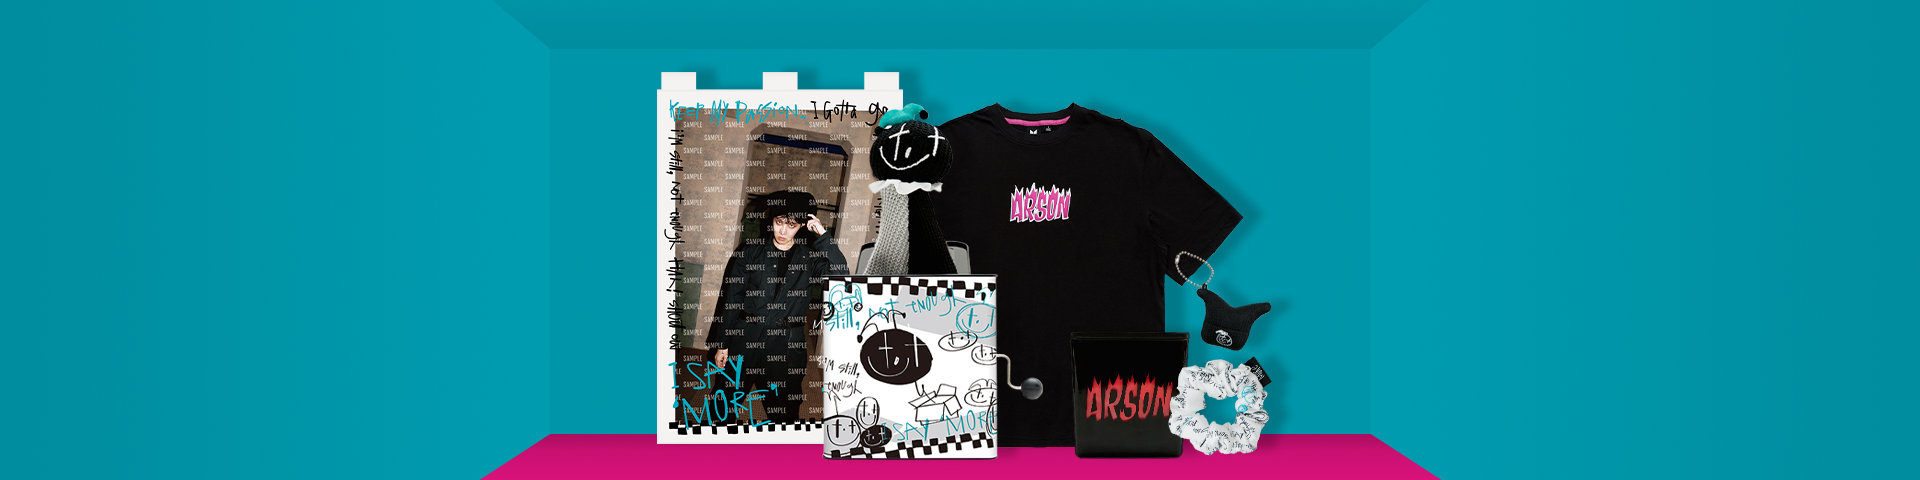 BTS' j-hope unveils merch line for upcoming album 'Jack In The Box